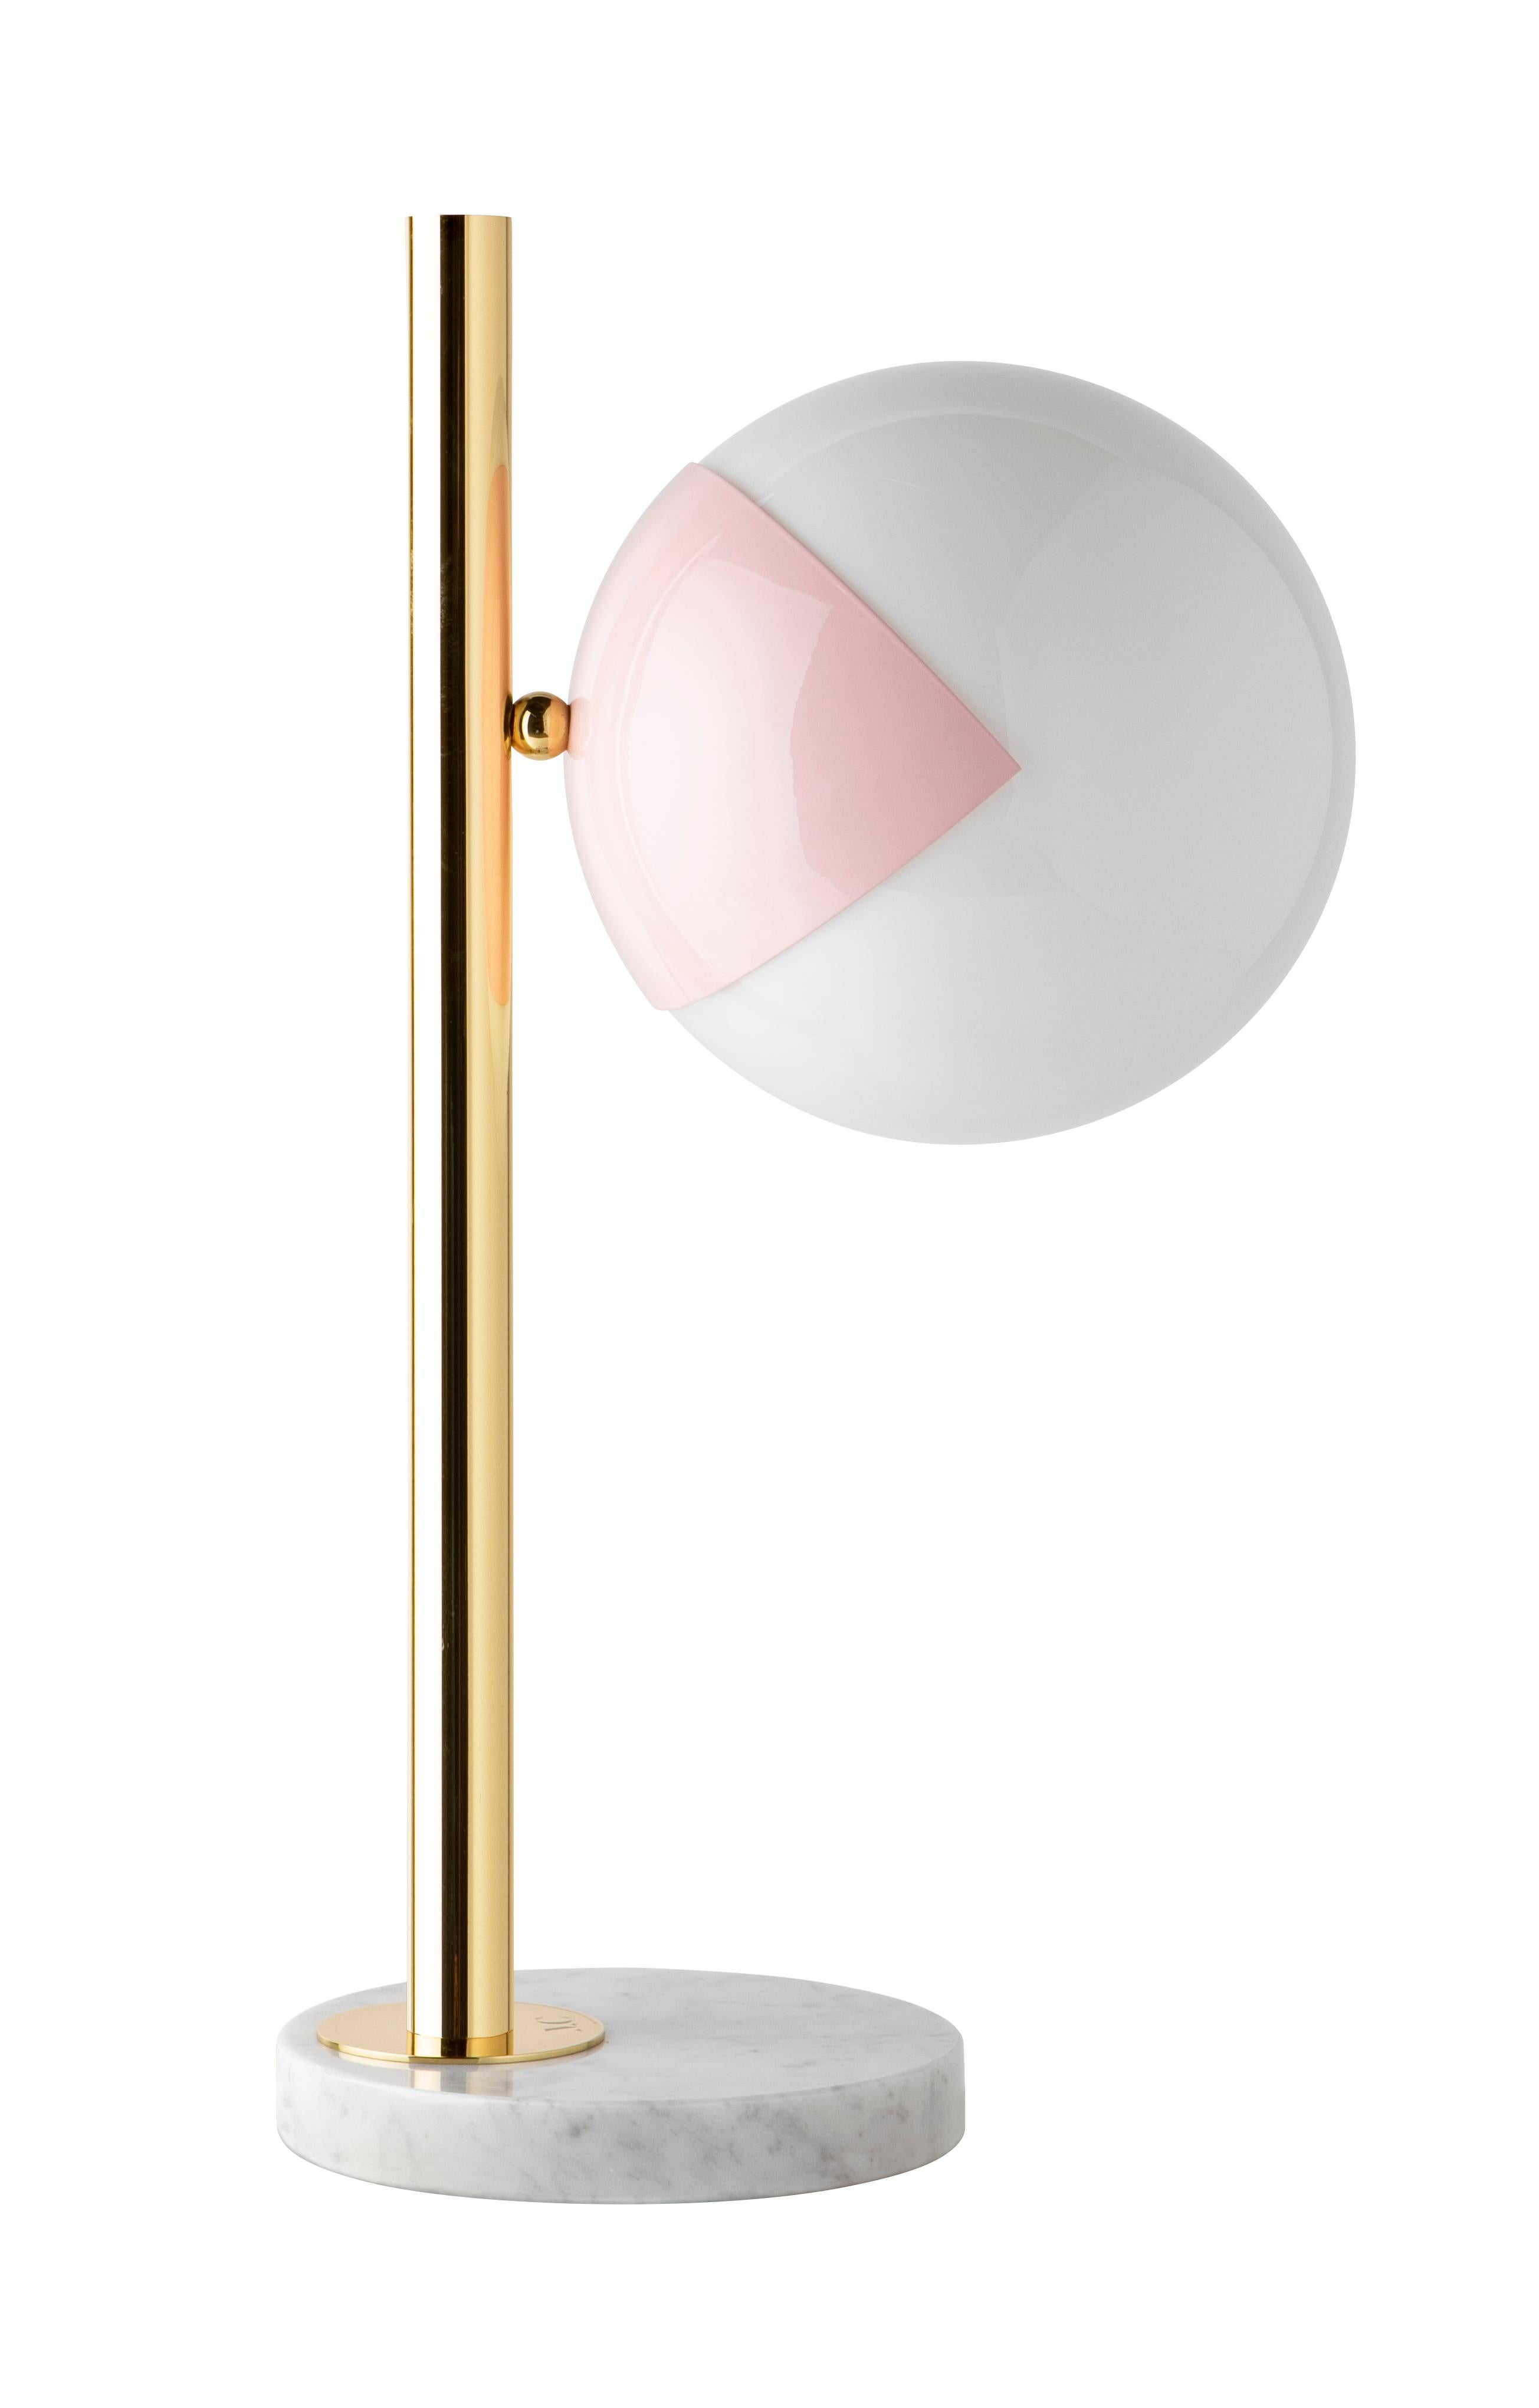 Blue table lamp pop-up dimmable by Magic Circus Editions
Dimensions: Ø 22 x 30 x 53 cm 
Materials: Carrara marble base, smooth brass tube, glossy mouth blown glass
Also non-dimmable version available.

All our lamps can be wired according to